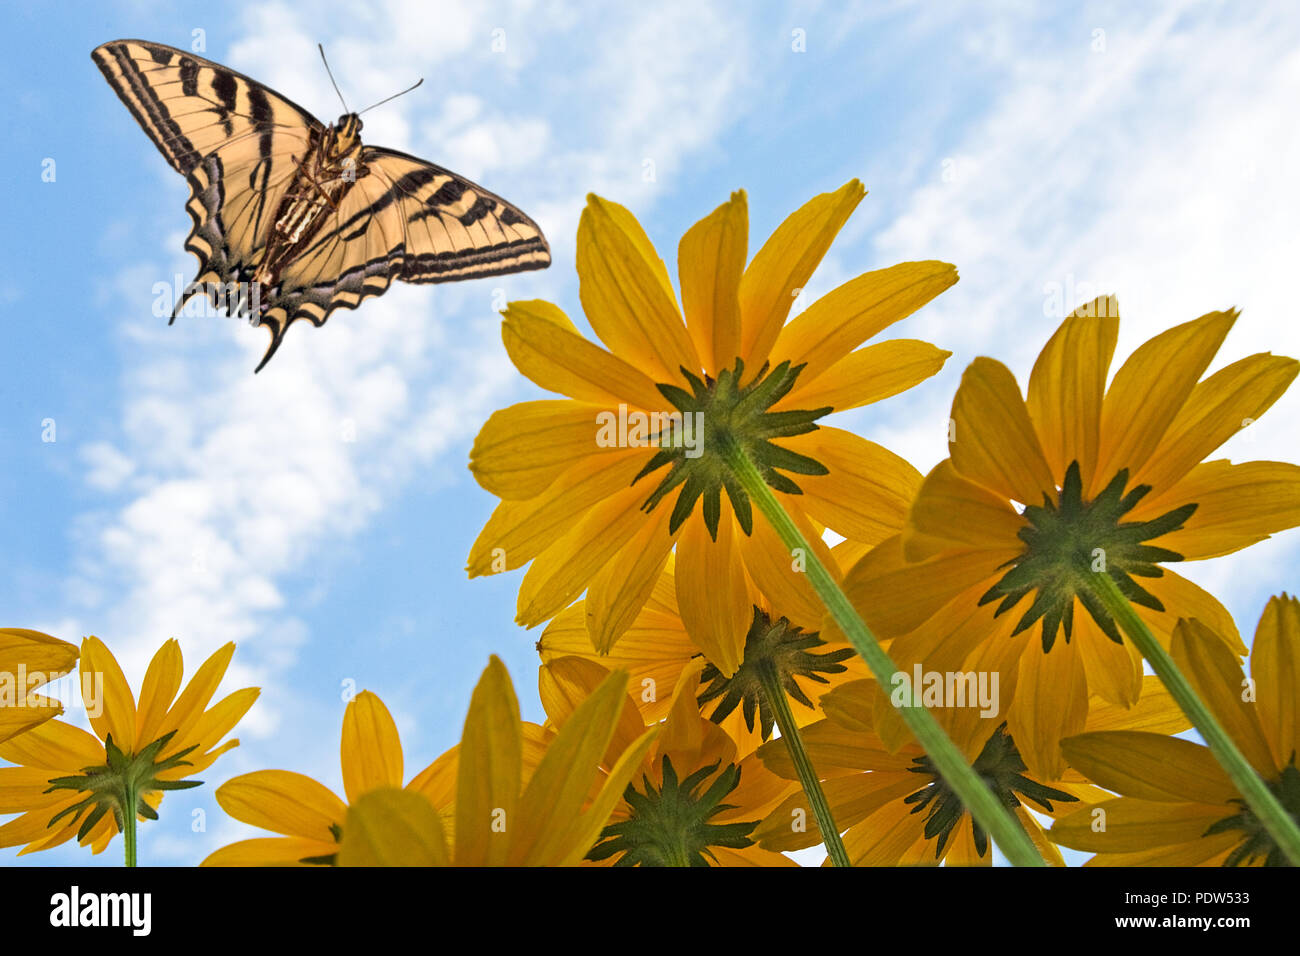 A group of black-eyed susan wildflowers grow profusely in the hot summer sun as a pale swallowtail butterfly hovers overhead. Stock Photo